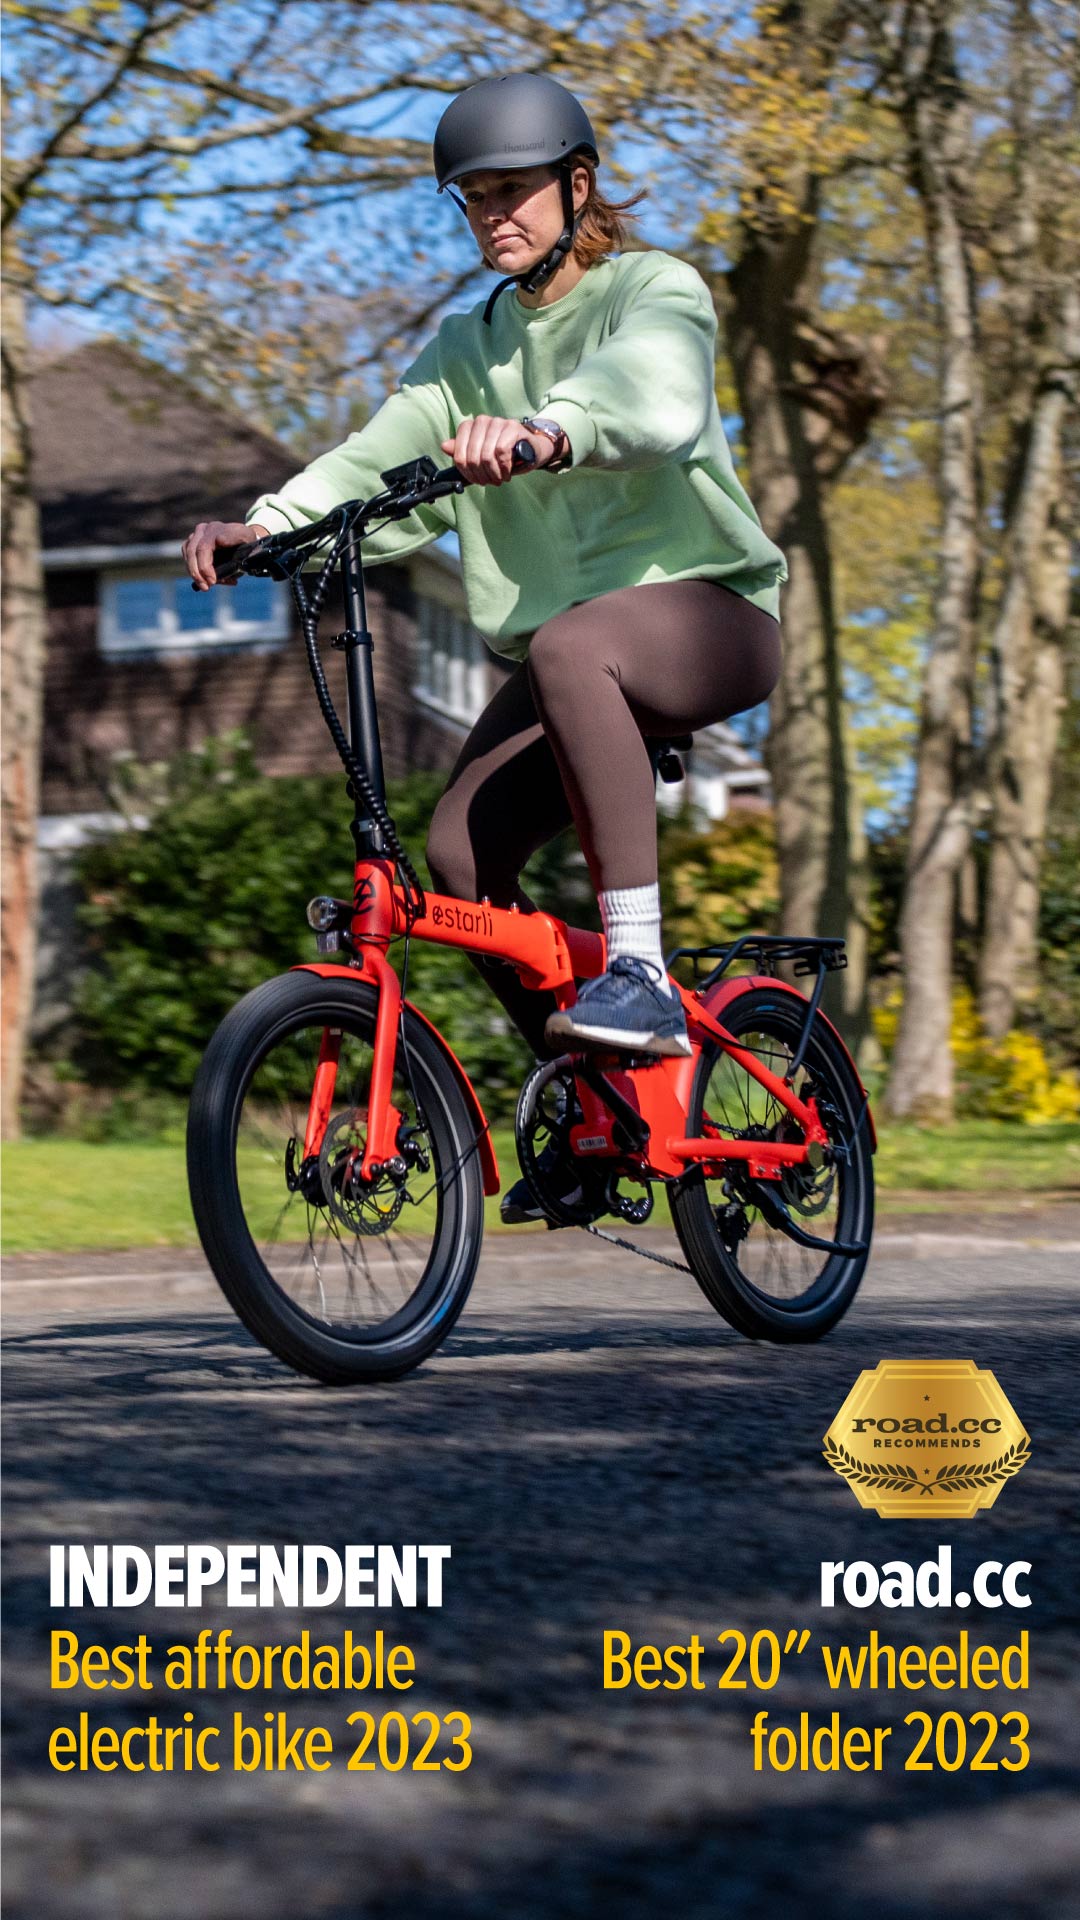 The award-winning estarli e20.7. Named 'Best affordable electric bike in 2023' by The Independent Newspaper and 'Best 20 inch wheeled folder in 2023' by Roadcc magazine.